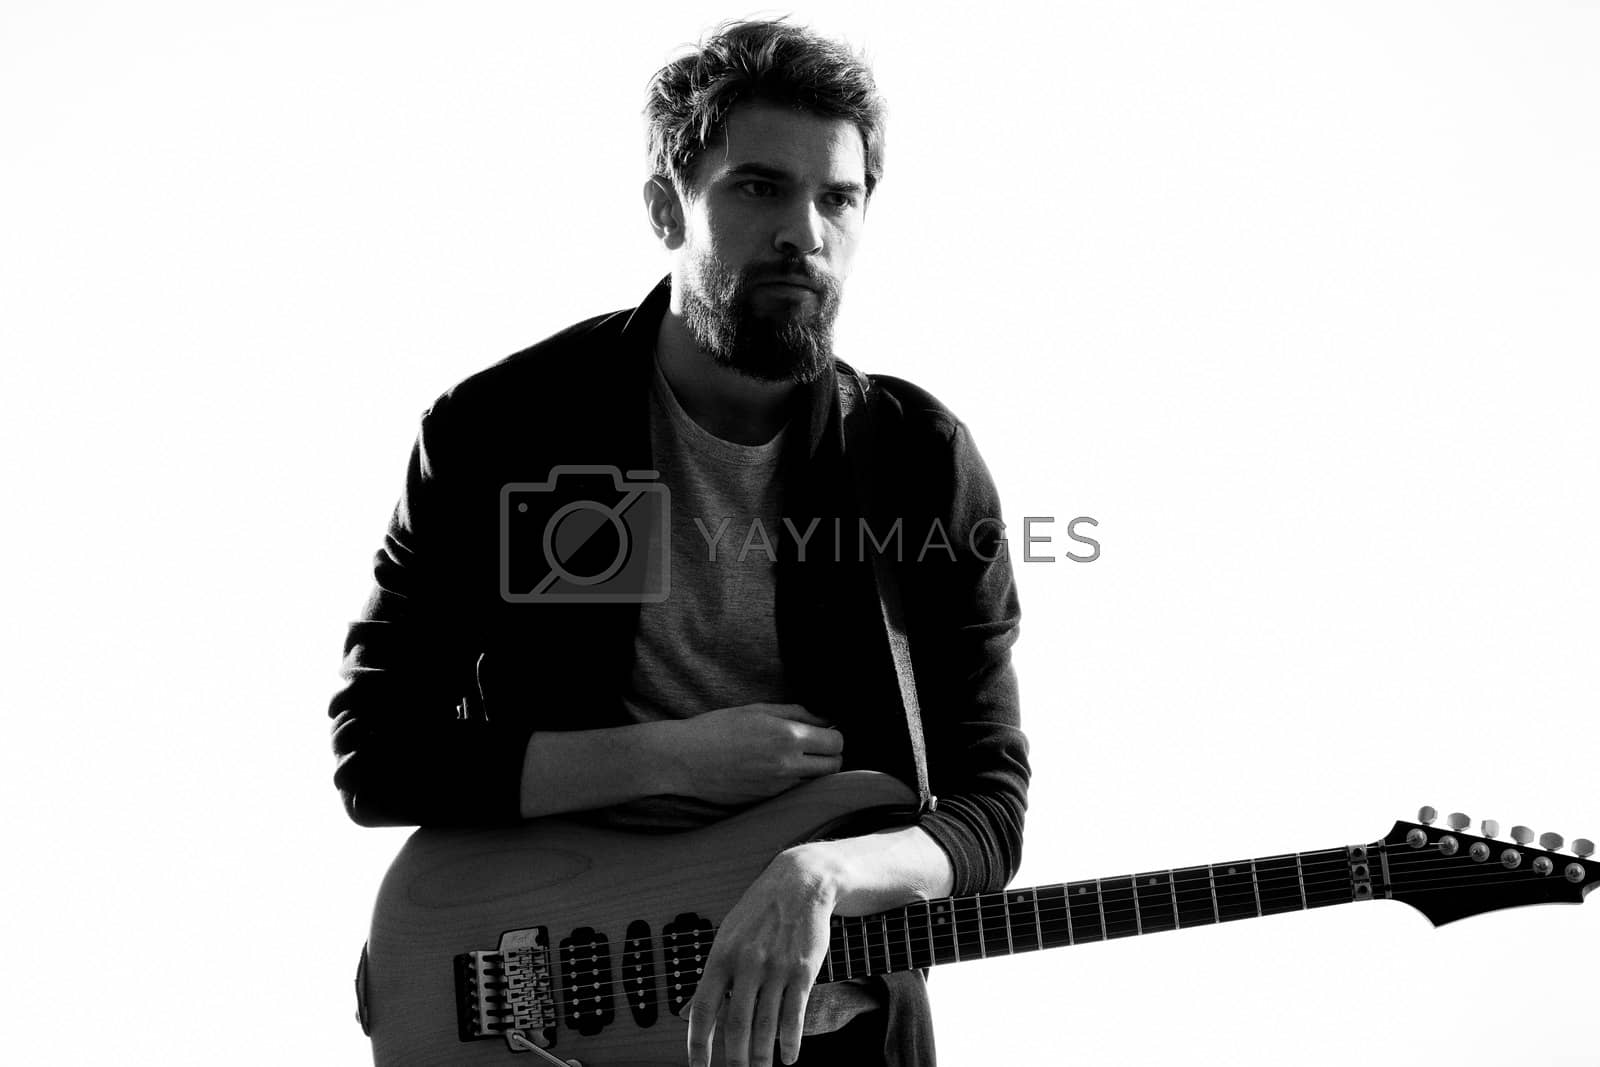 Royalty free image of Musician with guitar rock star emotions entertainment modern performer by SHOTPRIME